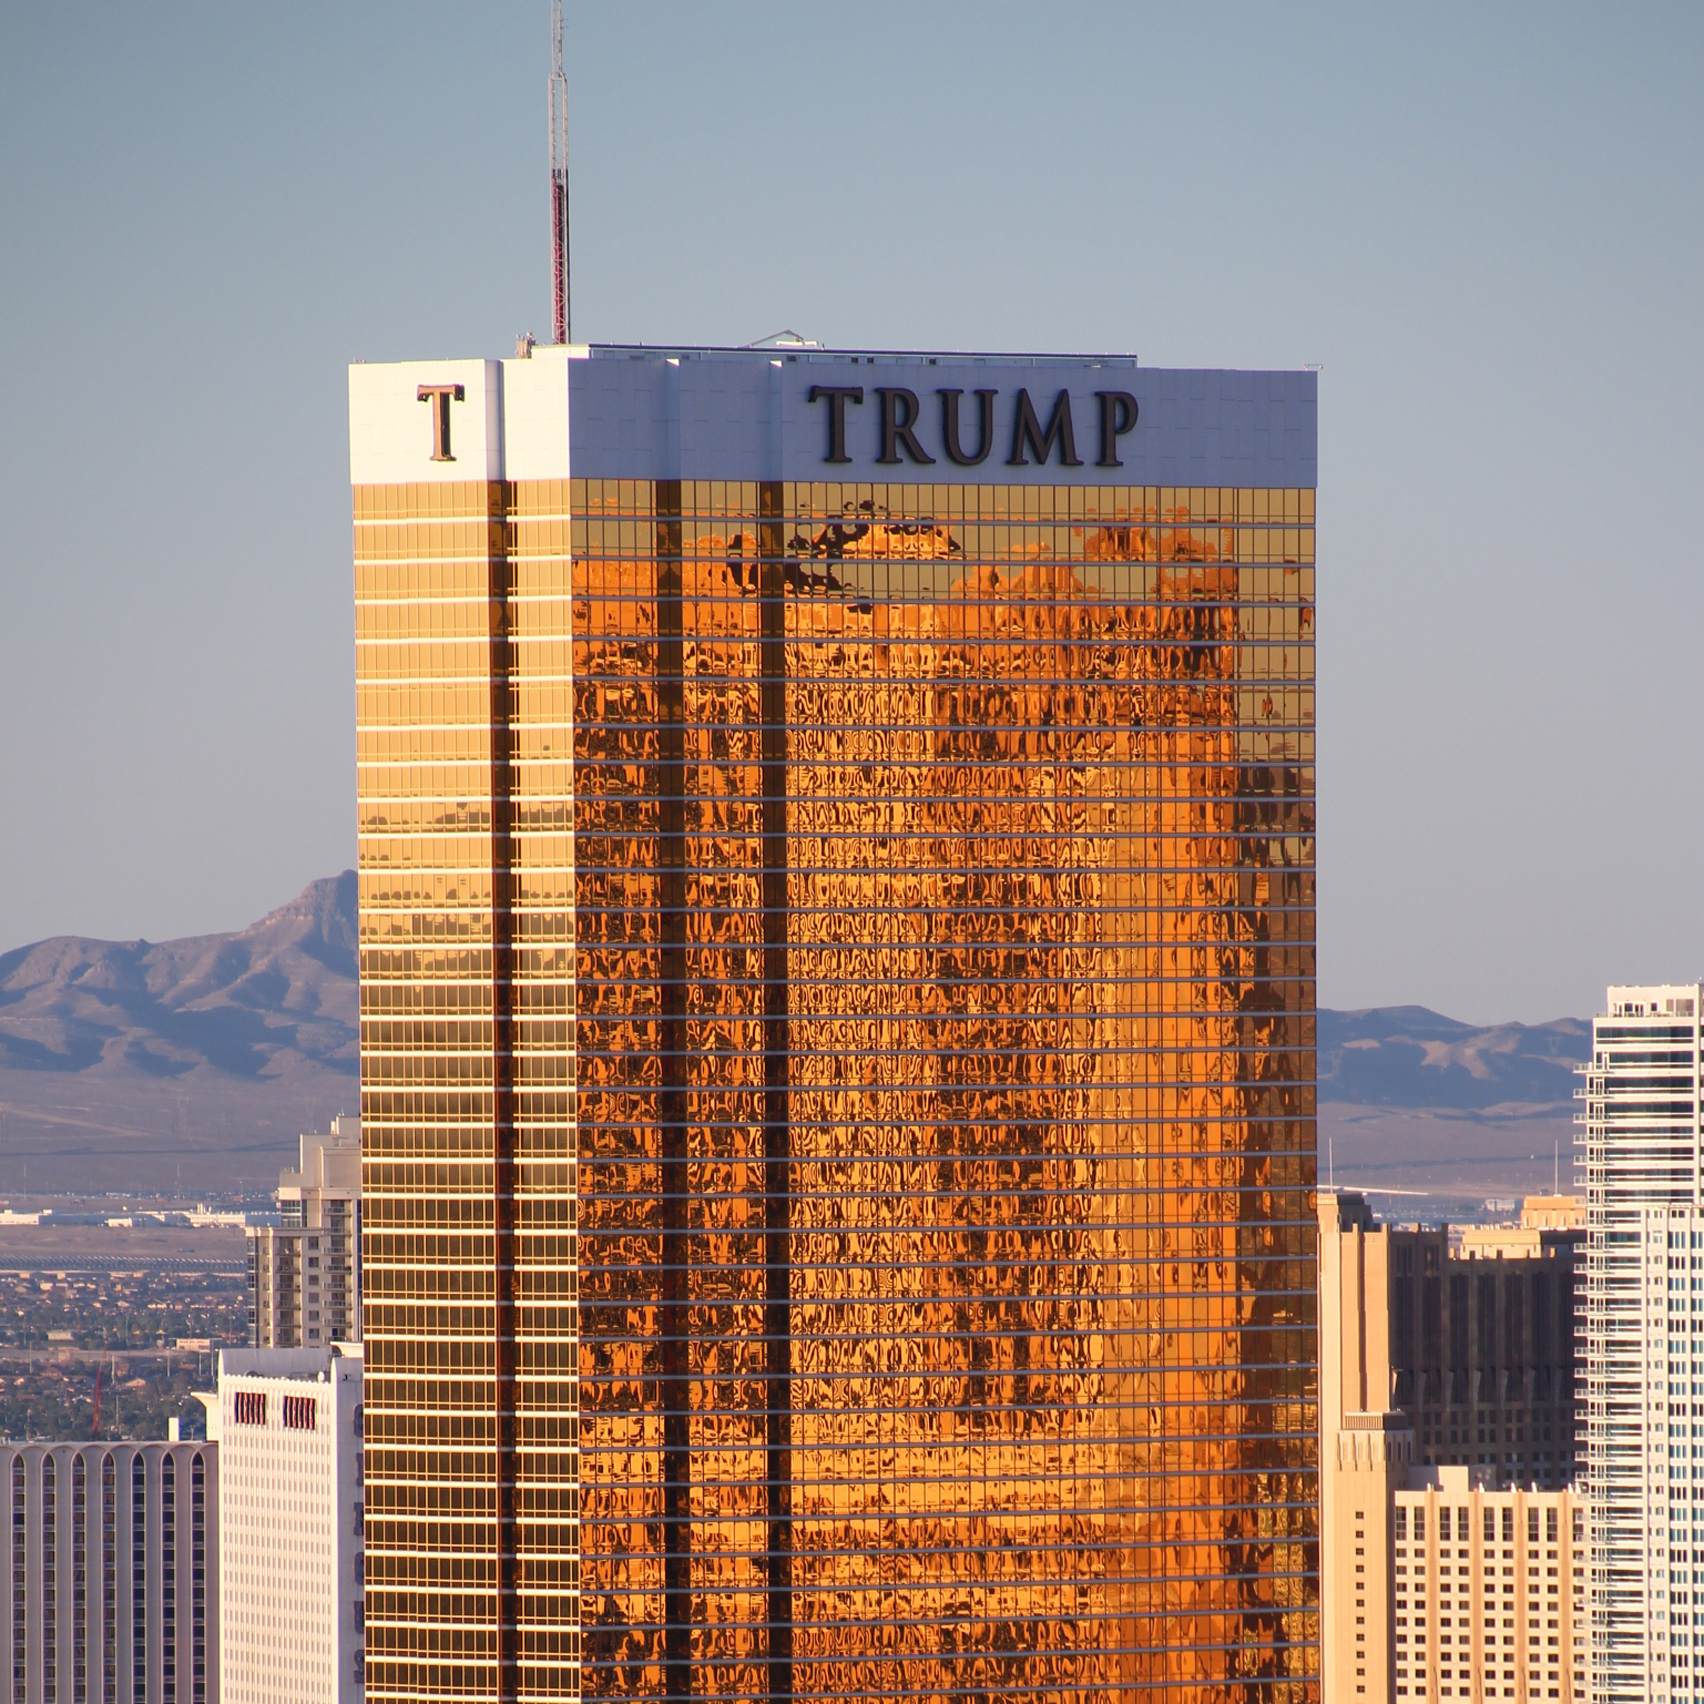 donald-trump-towers-architecture-trumpitecture-skyscapers-us-election-2016-opinion-doug-staker_dezeen_sqb